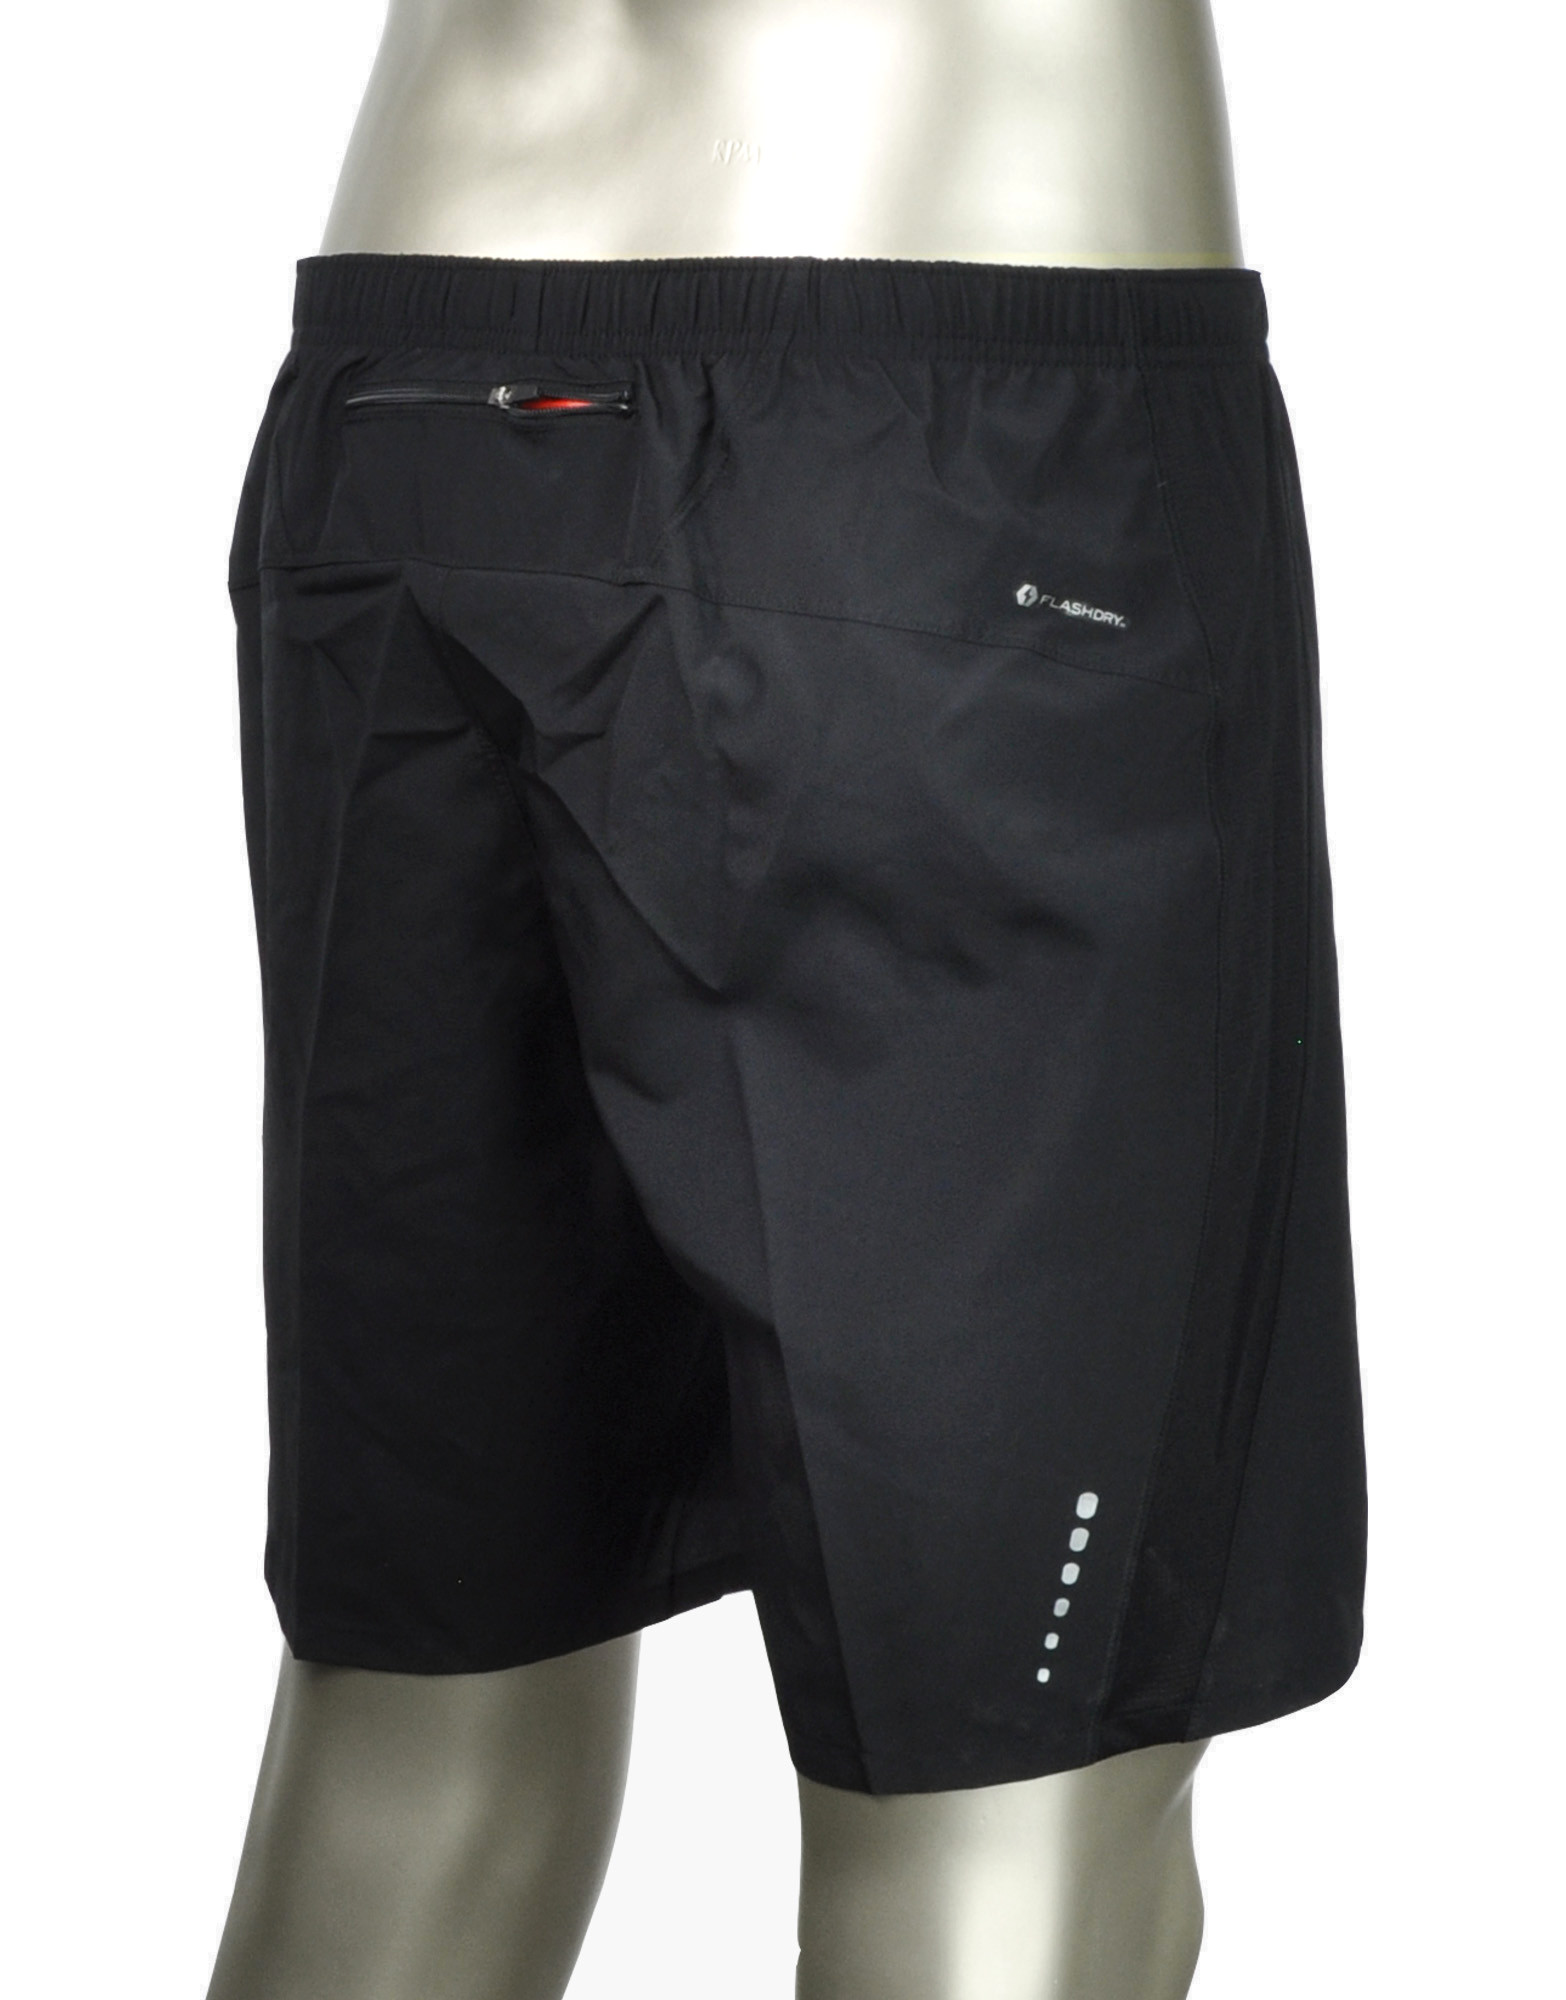 M GTD Running Shorts by THE NORTH FACE 